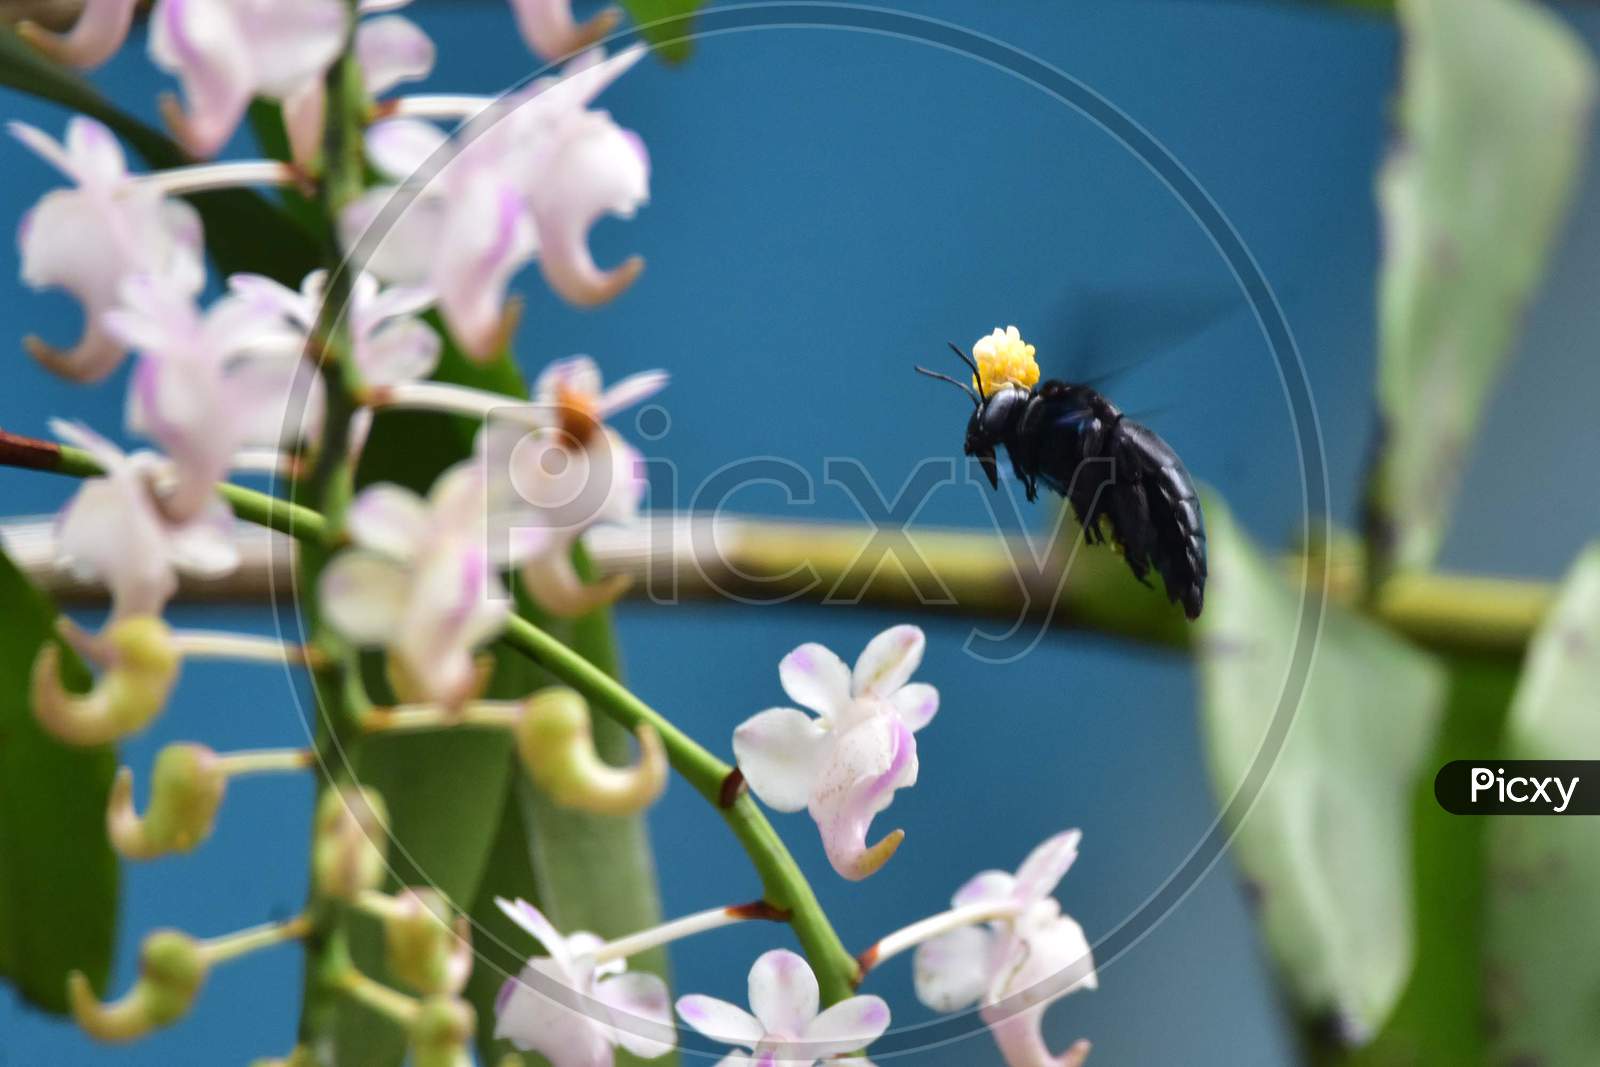 A Bumblebee Collects Nectar From An Orchid Flower In Nagaon District Of Assam On May 24,2020